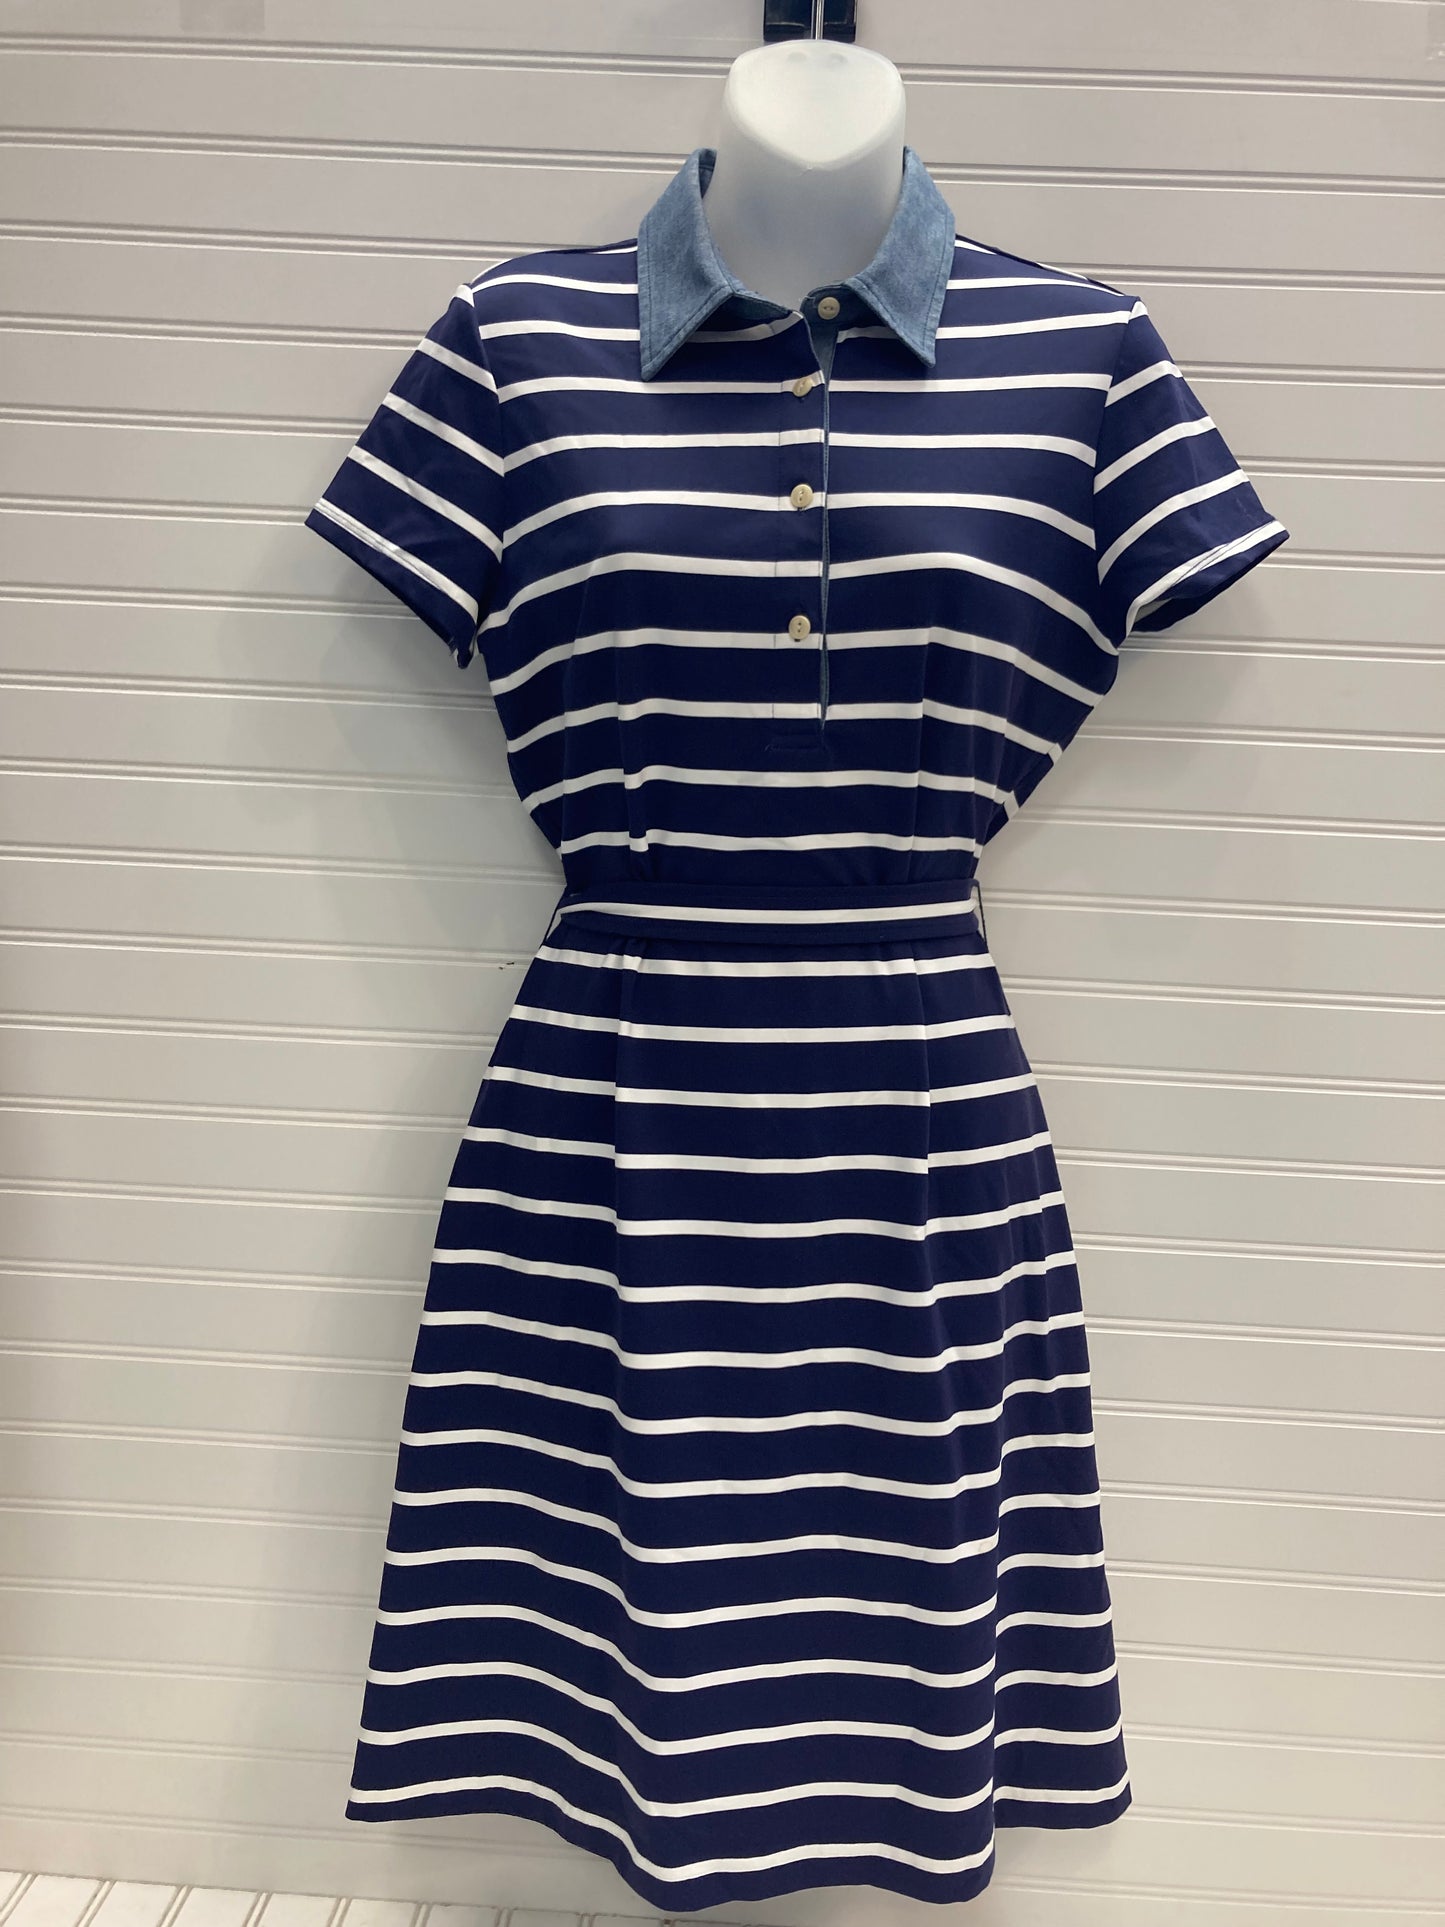 Dress Casual Short By J Mclaughlin  Size: S